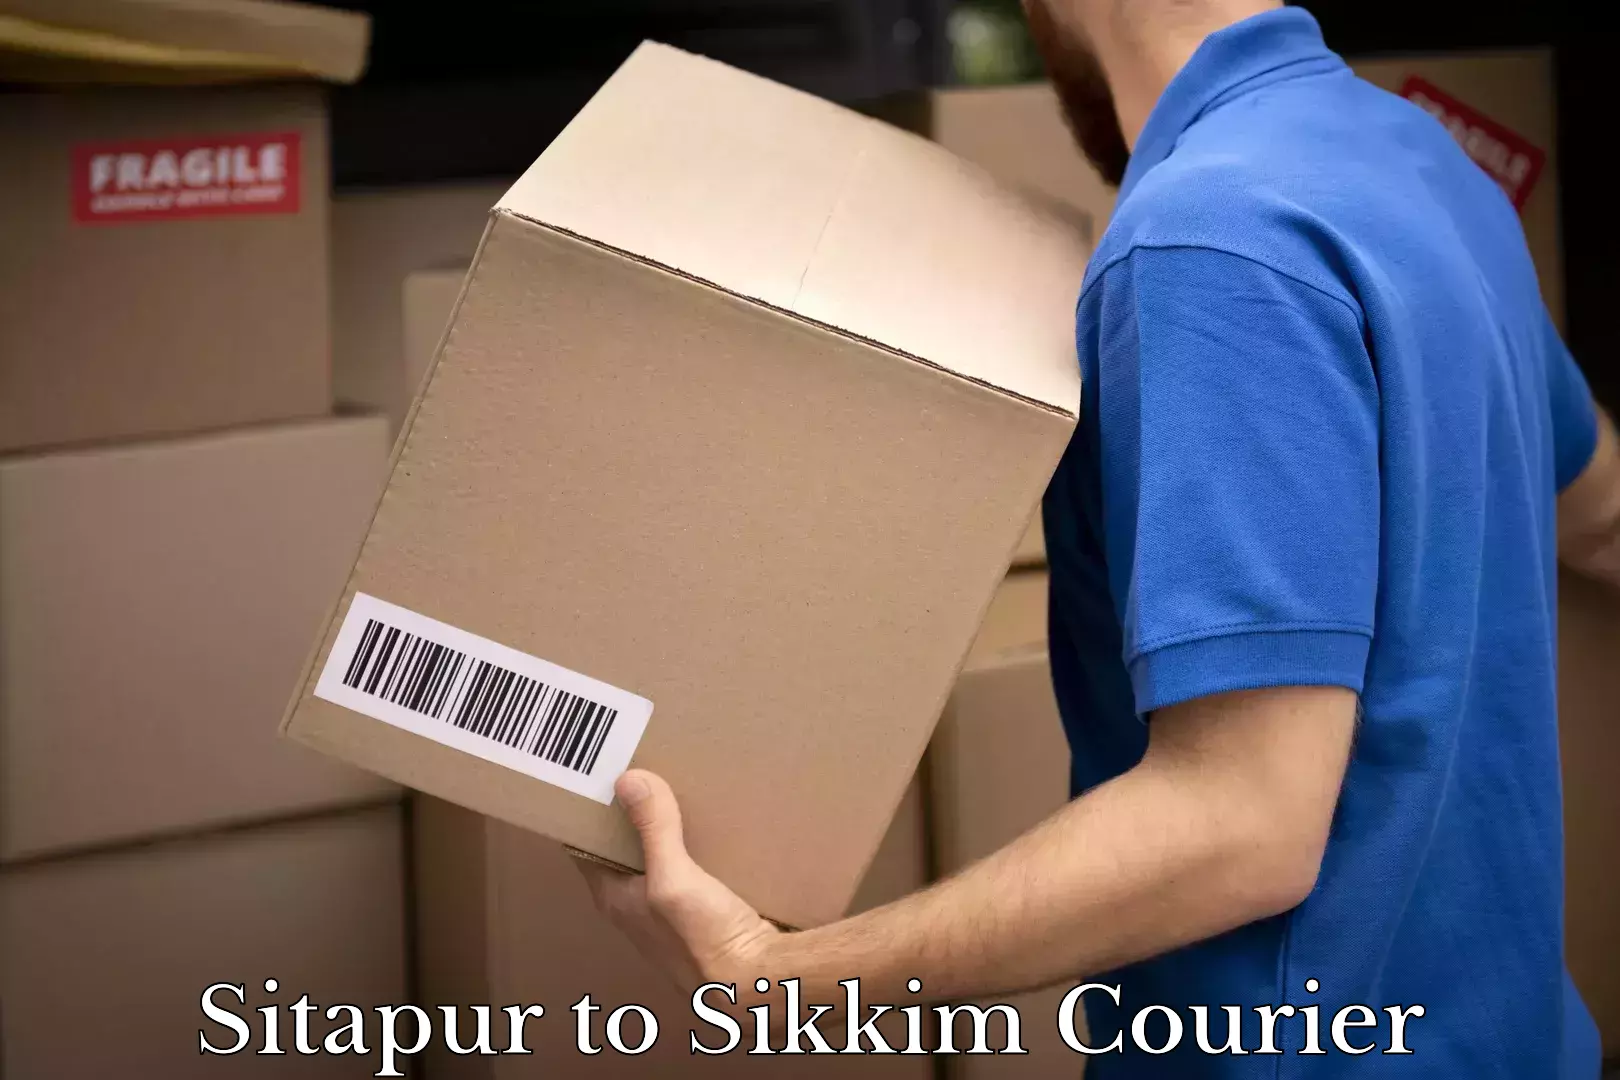 Subscription-based courier Sitapur to Sikkim